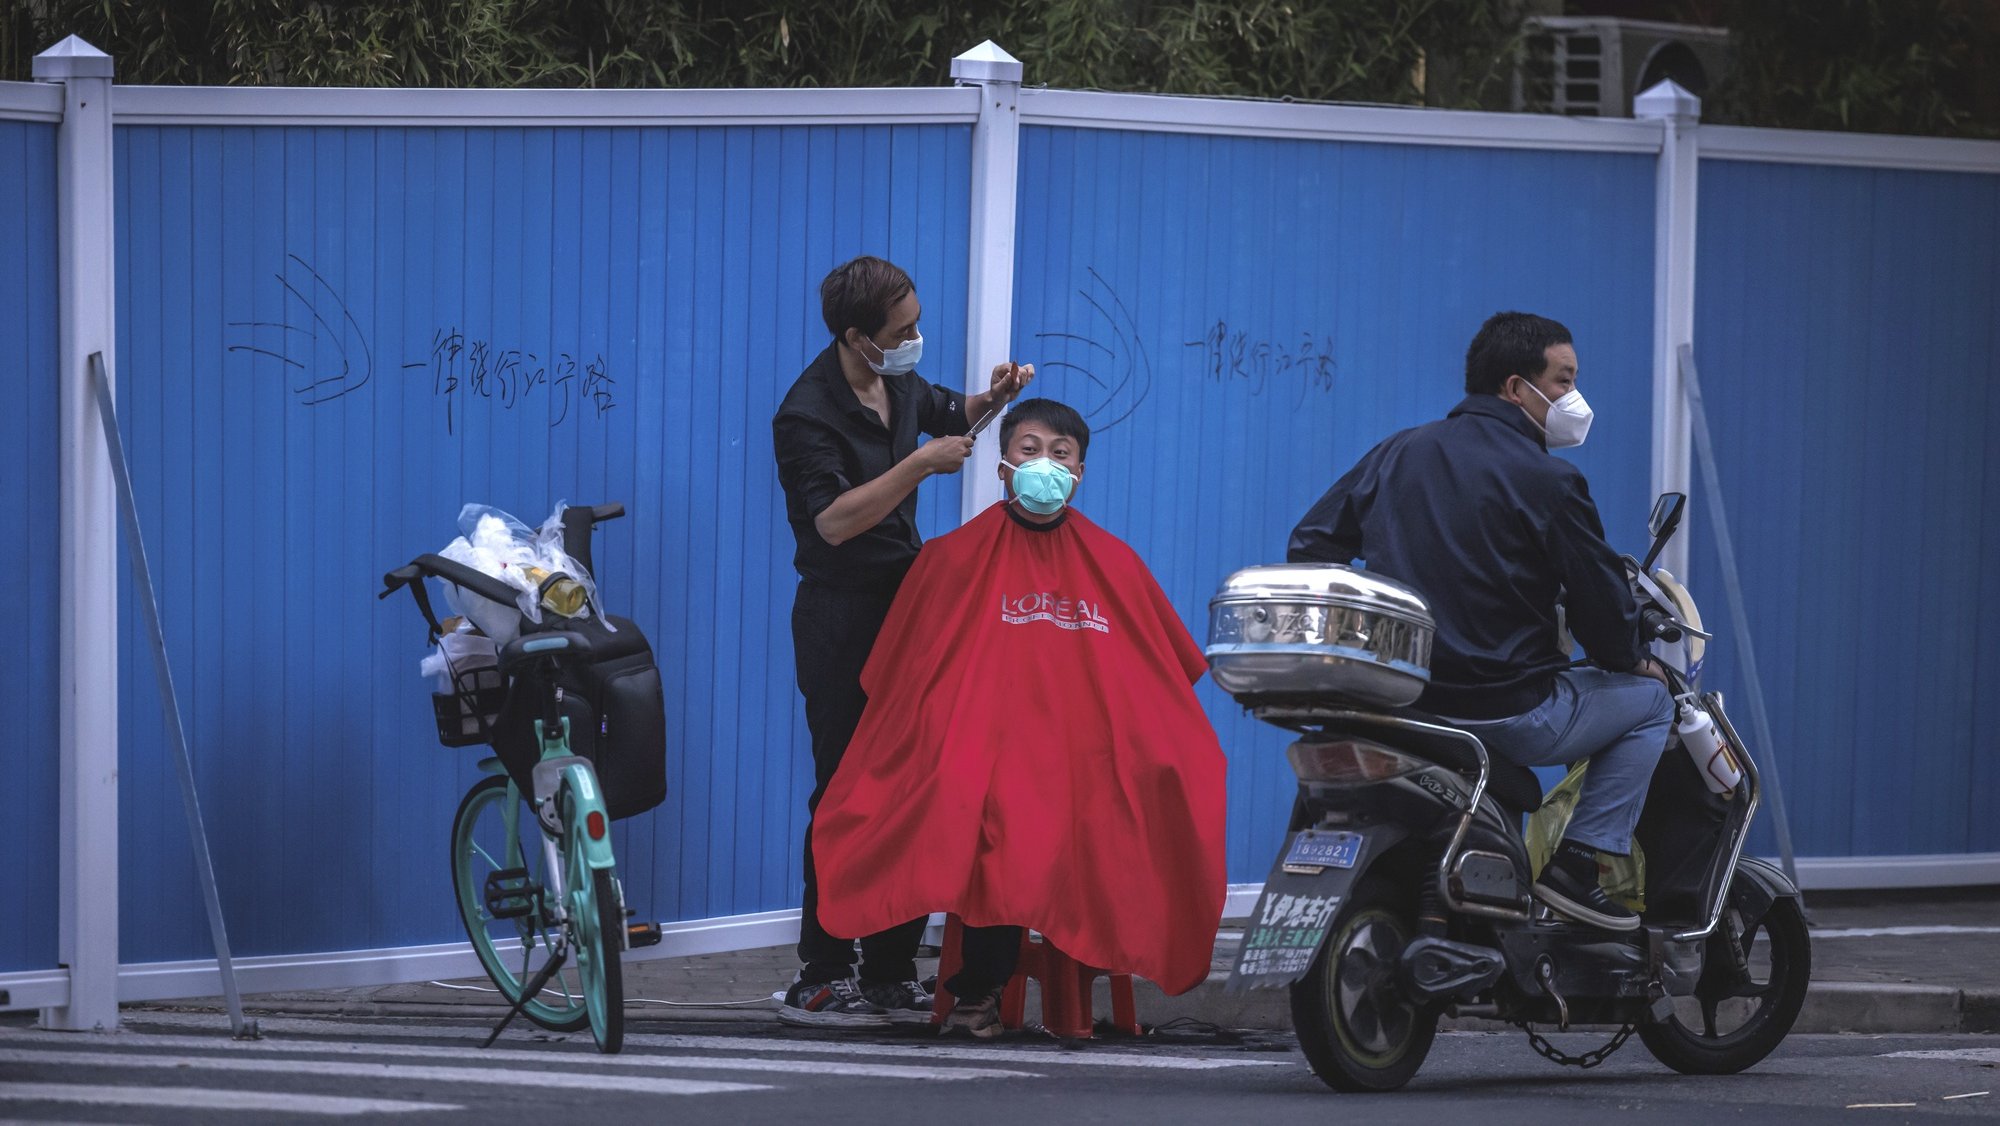 epa09935917 A man has a haircut on the street amid the ongoing Covid-19 lockdown in Shanghai, China, 09 May 2022. Shanghai on 09 May reported a drop in Covid-19 cases, while the city has been under strict lockdown amid China&#039;s zero-Covid policy for six consecutive weeks.  EPA/ALEX PLAVEVSKI